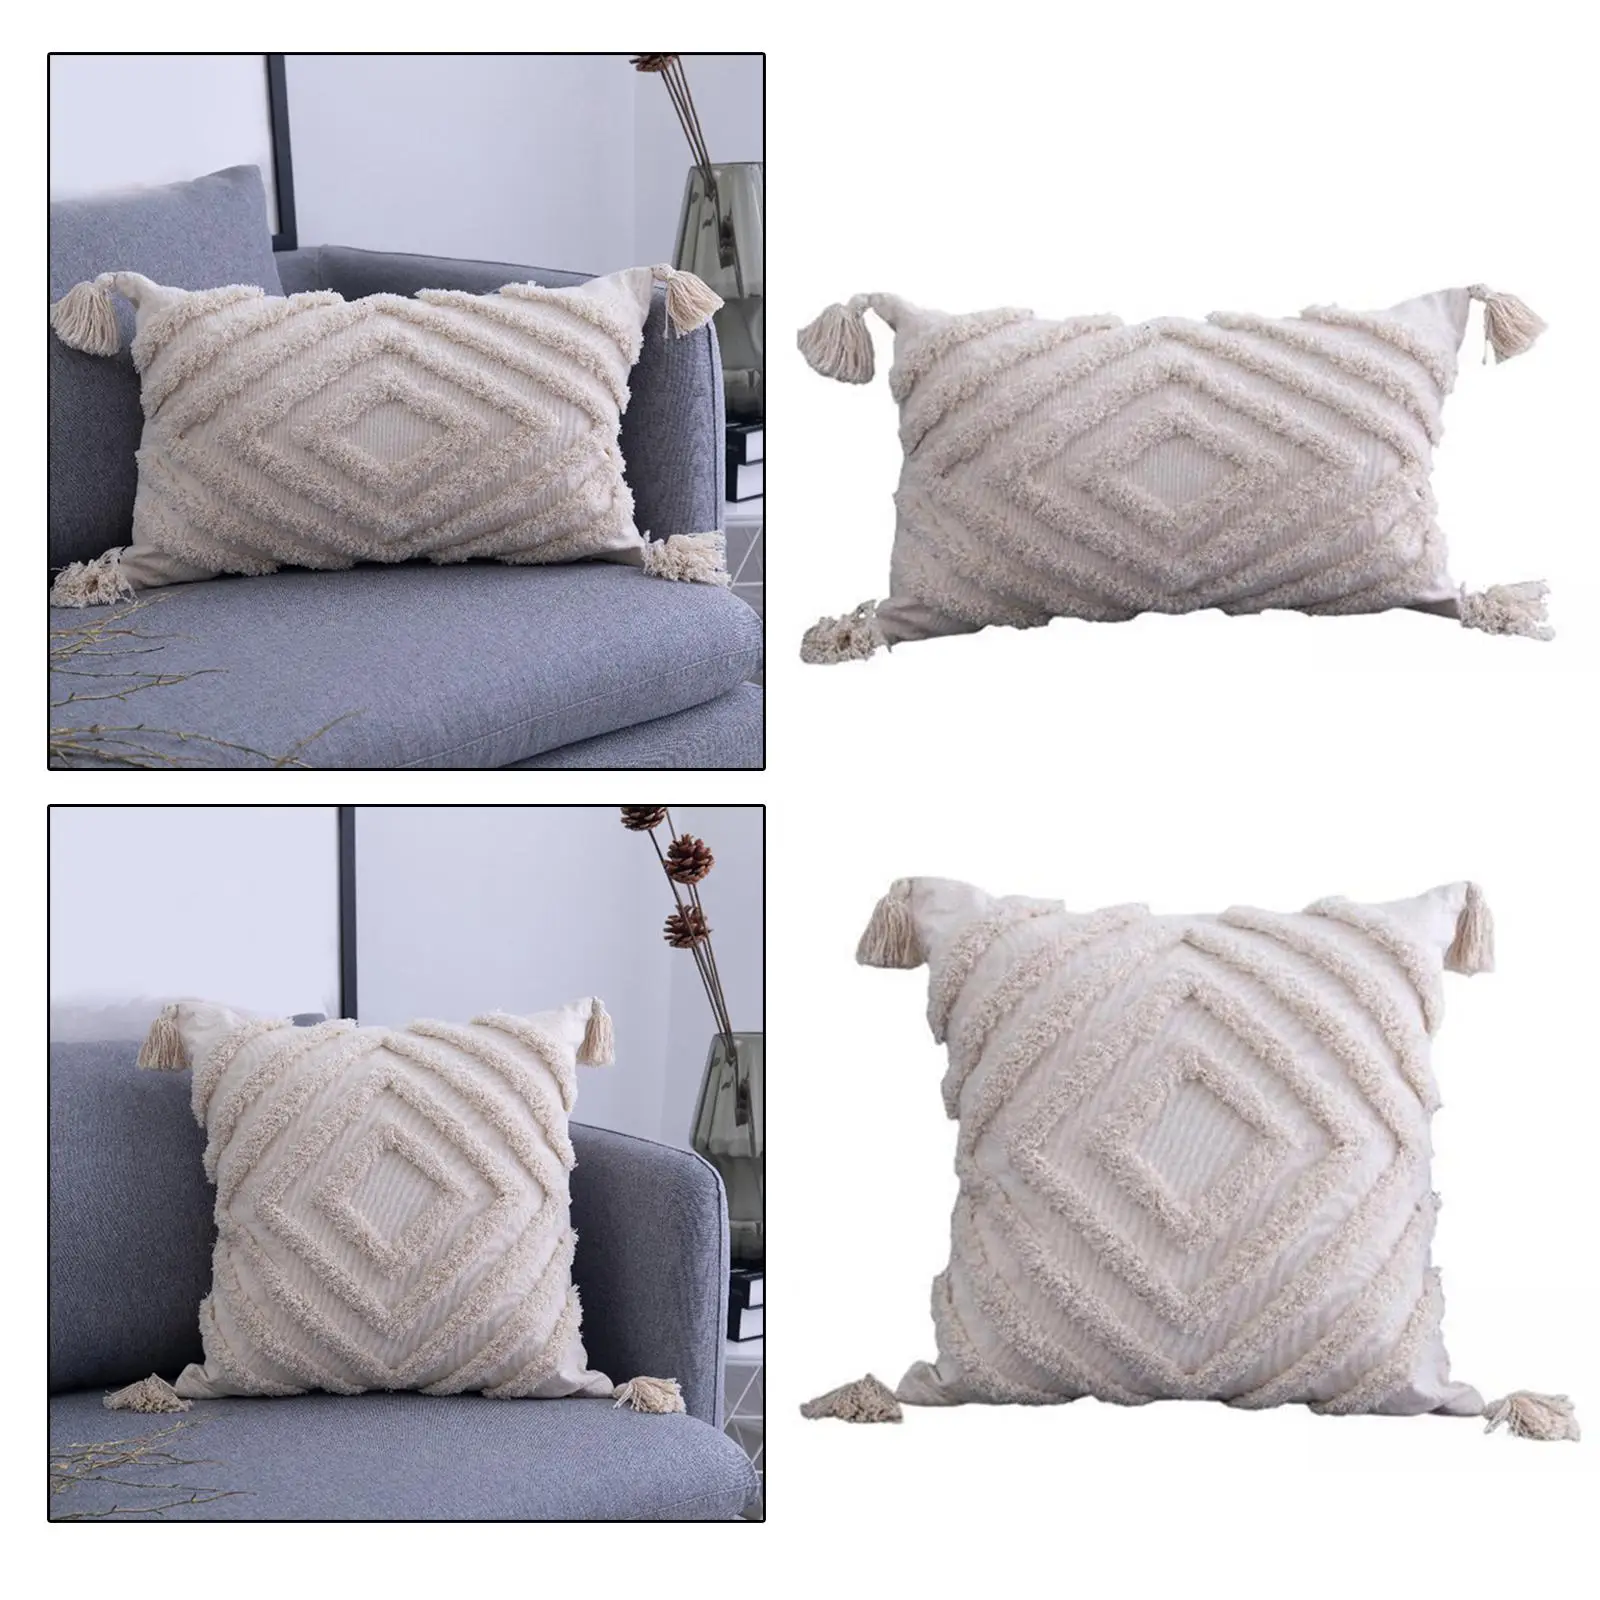 Loviver 2x Throw Pillow Cover Tassels Woven Tufted Cushion Cover for Bed